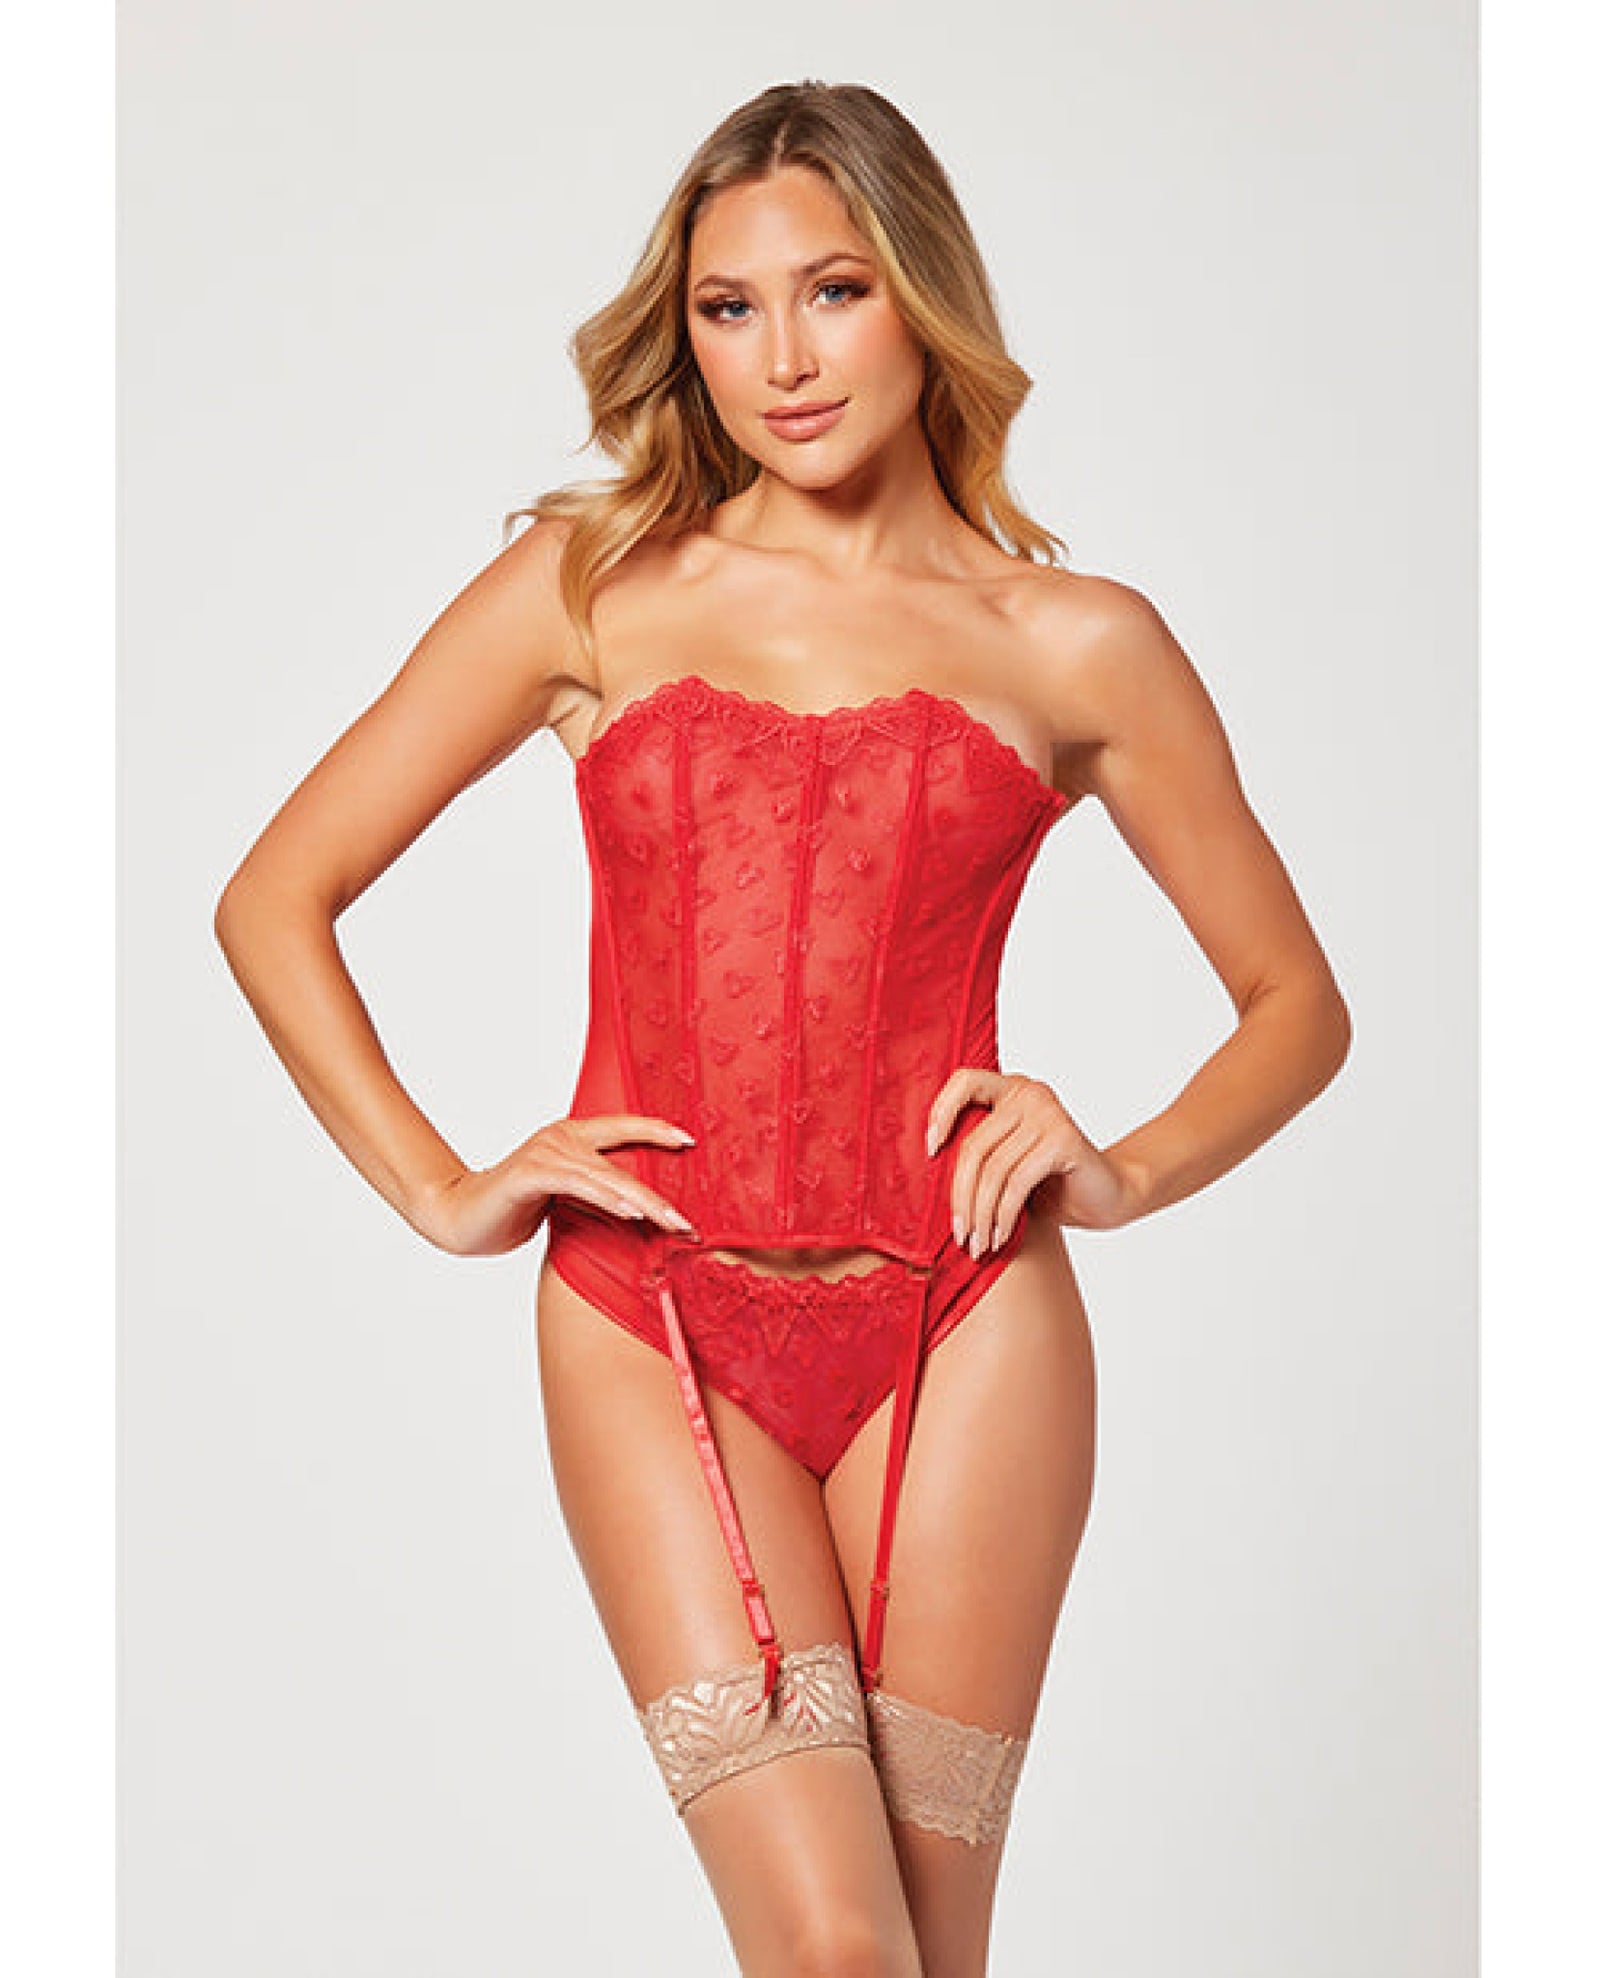 Valentines Heart Embroidered Mesh Bustier & Panty Red Seven 'til Midnight Costume